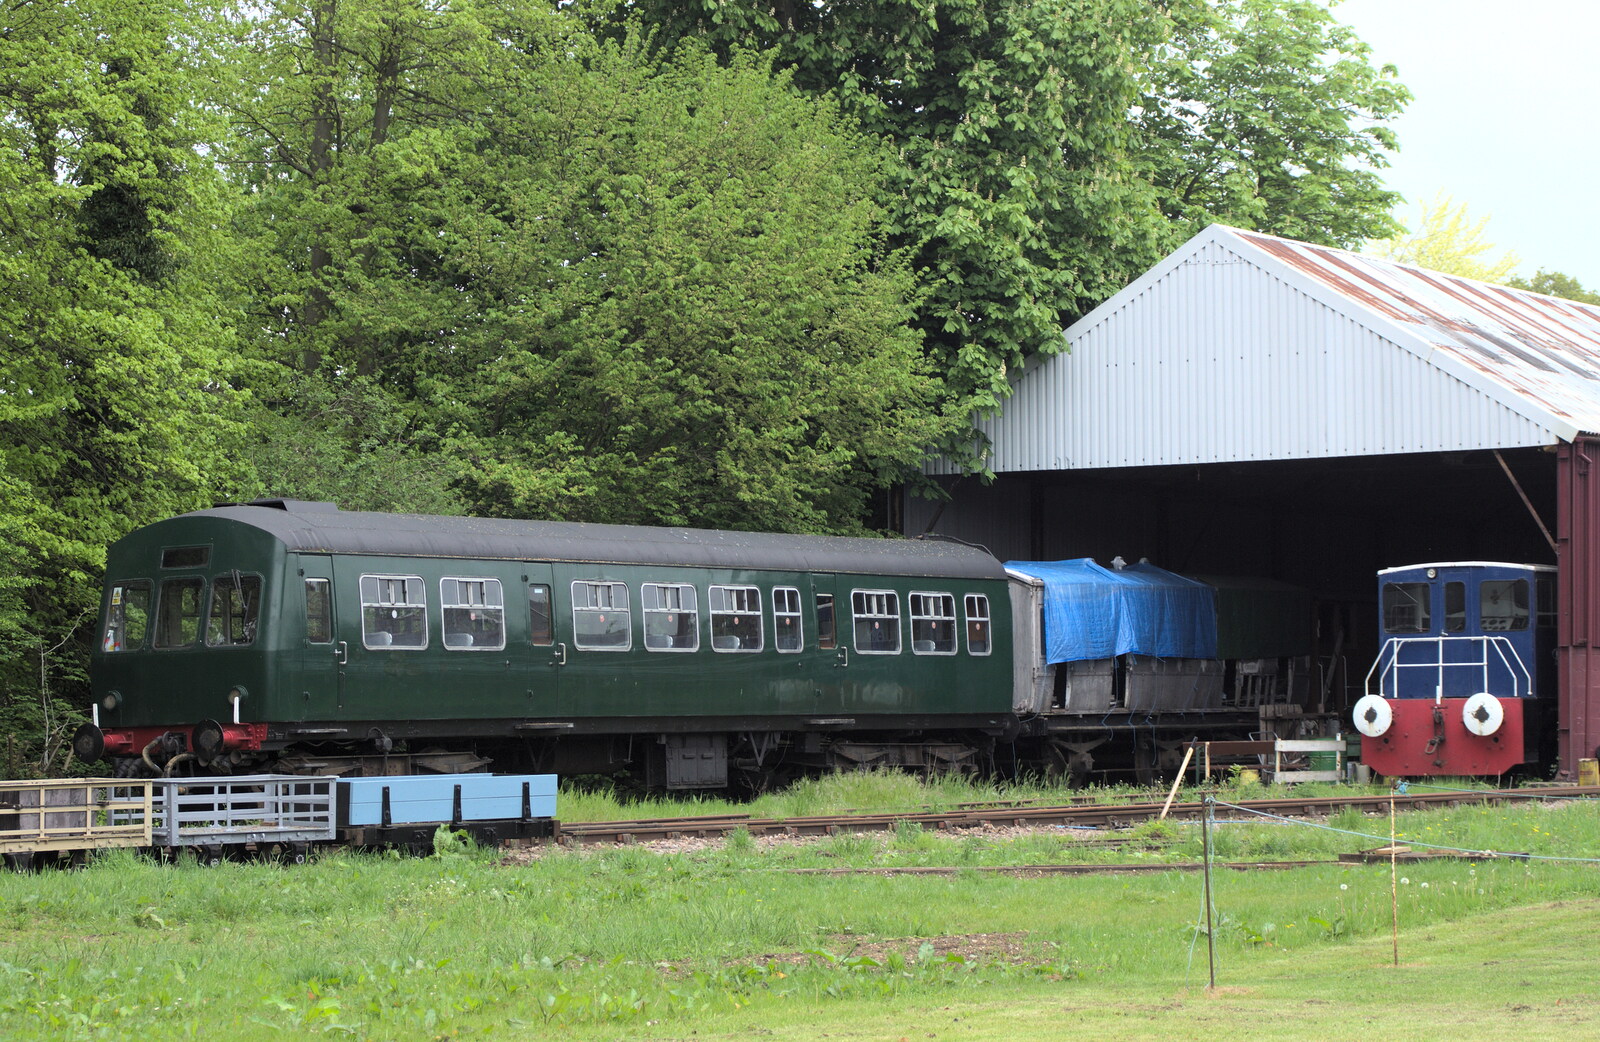 An old DEMU unit from A Day at Bressingham Steam and Gardens, Diss, Norfolk - 18th May 2013